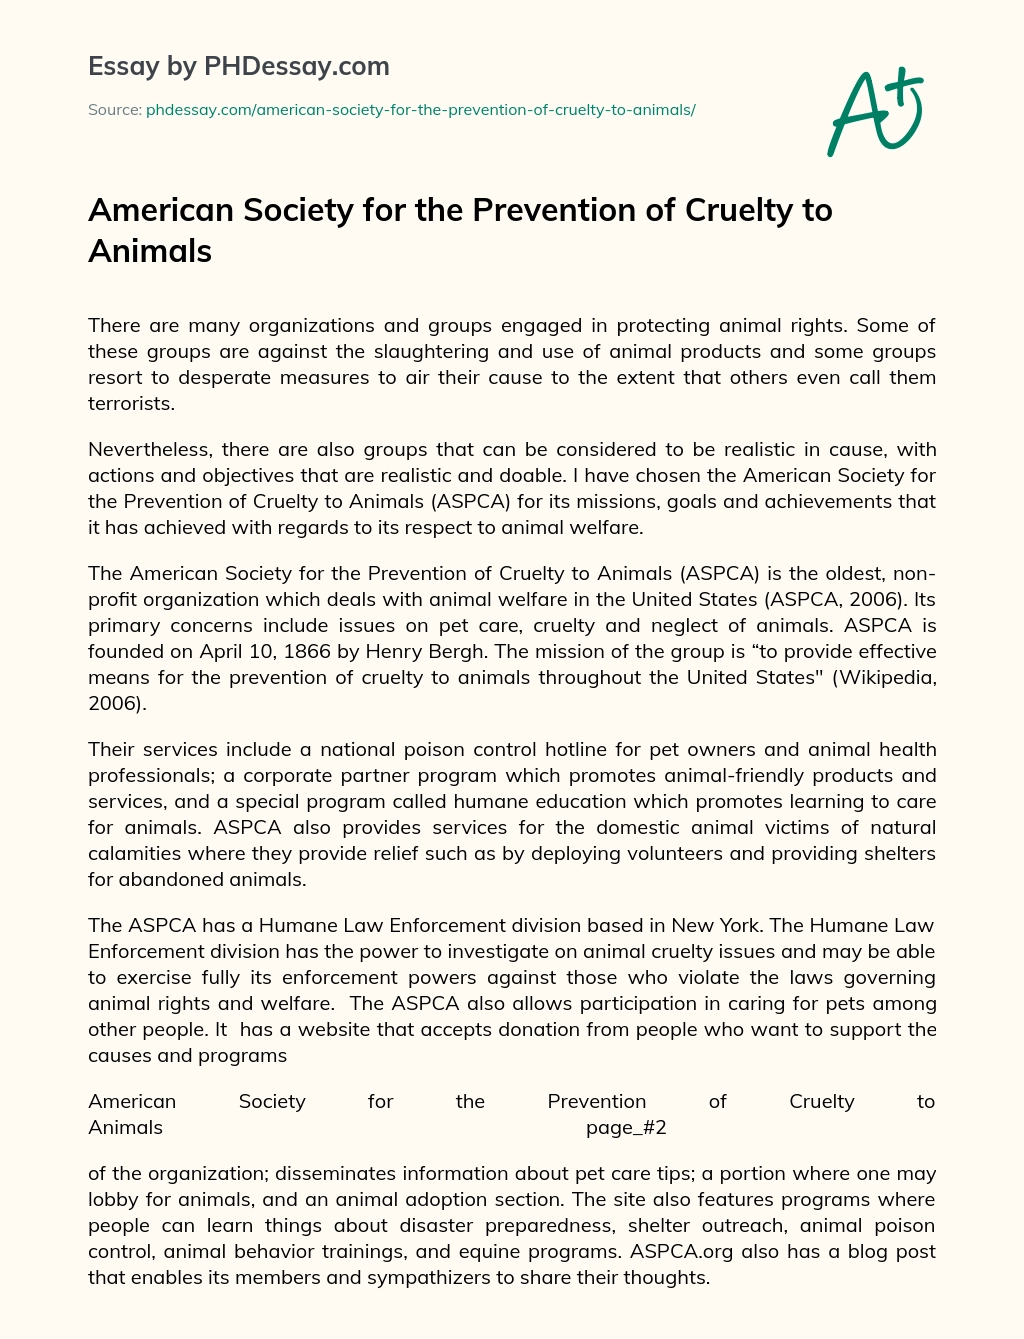 American Society for the Prevention of Cruelty to Animals essay